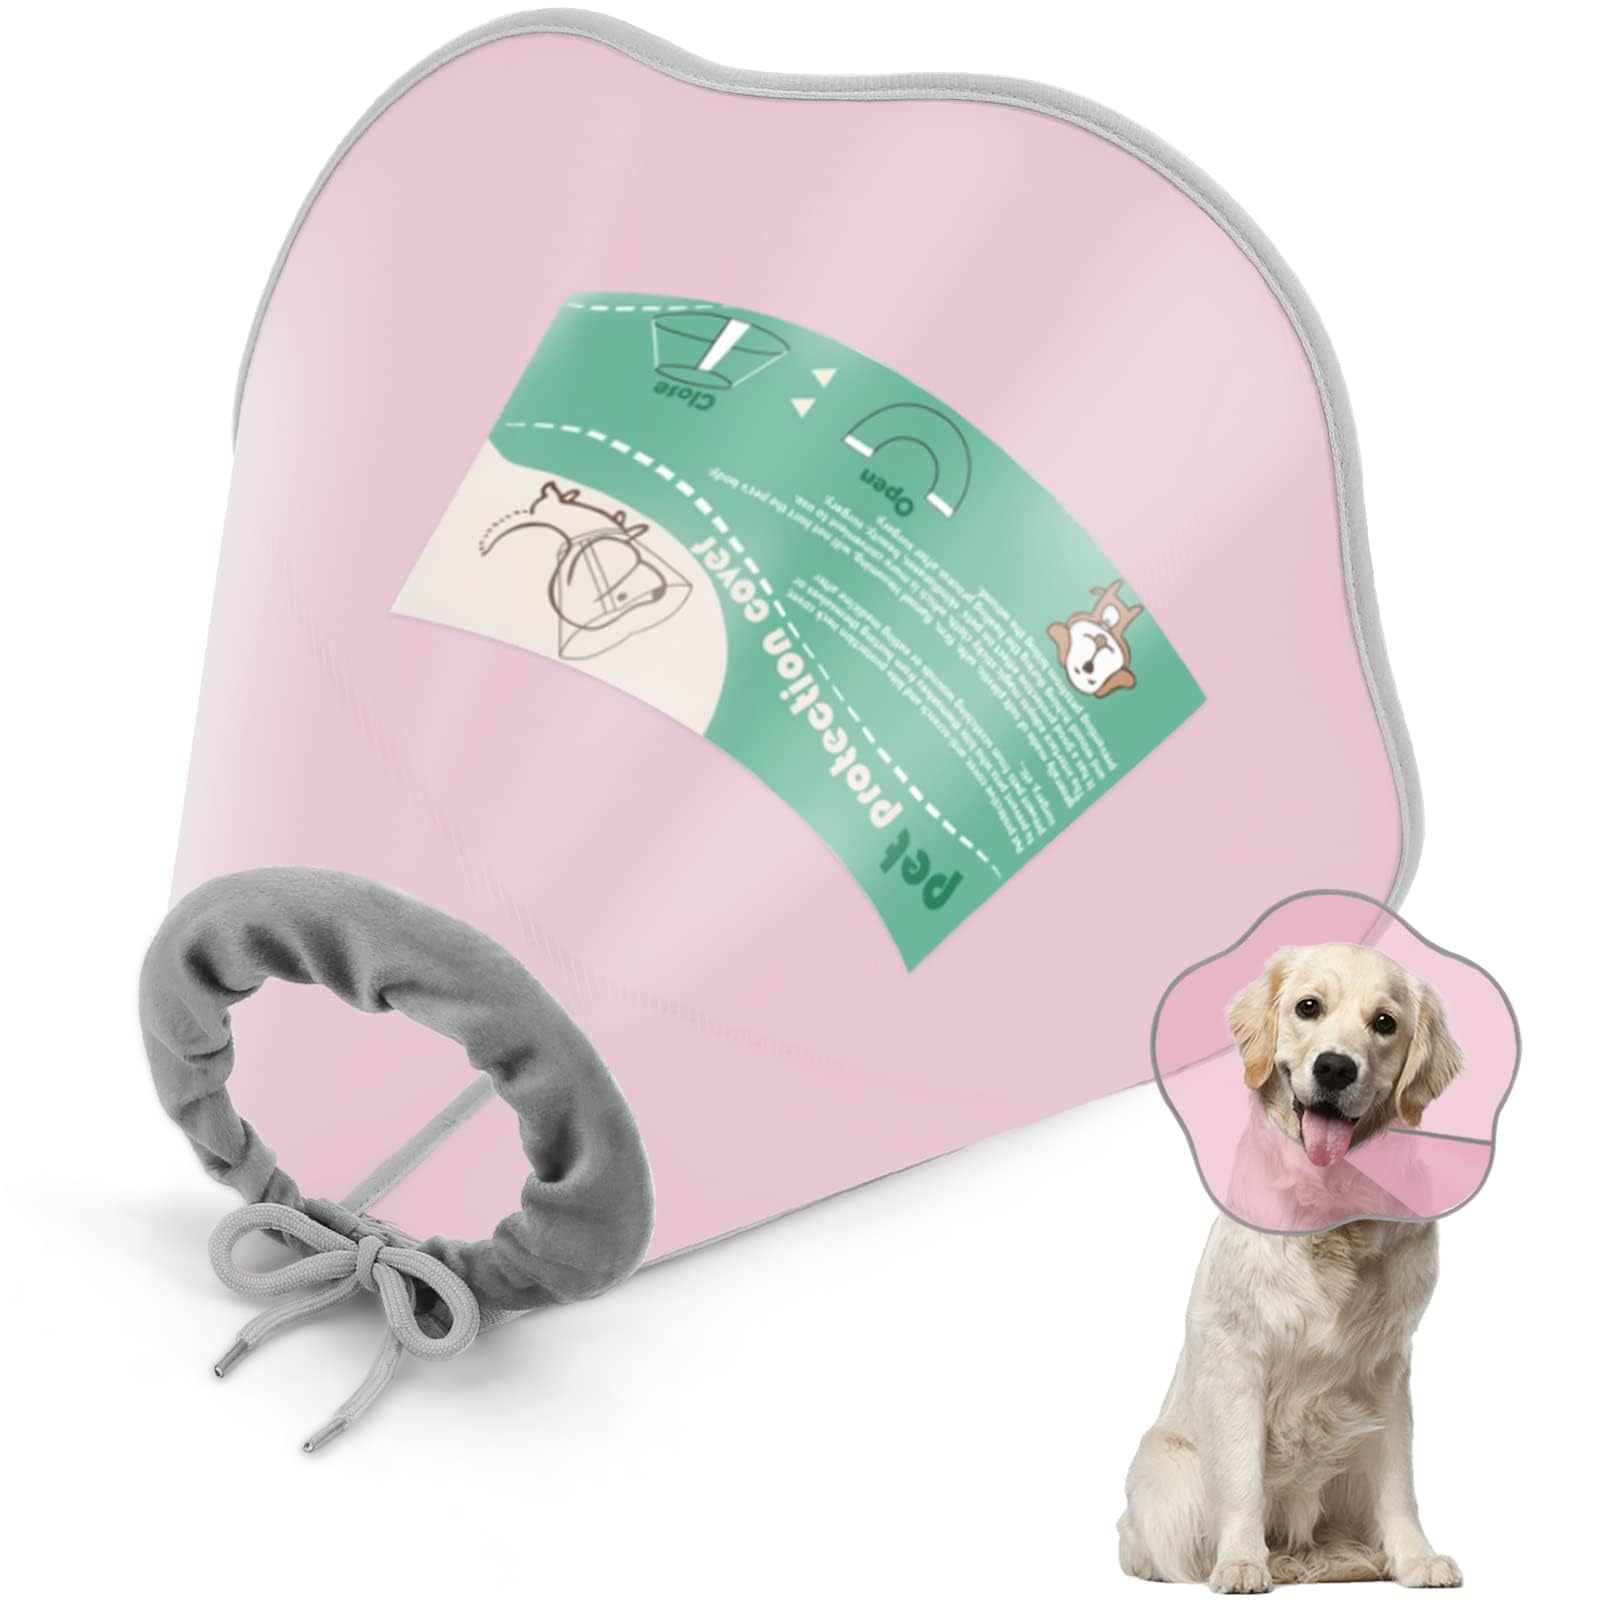 12 X SUPET DOG CONE COLLAR, ADJUSTABLE PET RECOVERY COLLAR DOG SURGERY CONE PROTECTIVE DOG CONE COLLAR FOR LARGE SMALL DOGS AFTER SURGERY, PLASTIC DOG CATS (PINK S) - TOTAL RRP £172: LOCATION - RACK